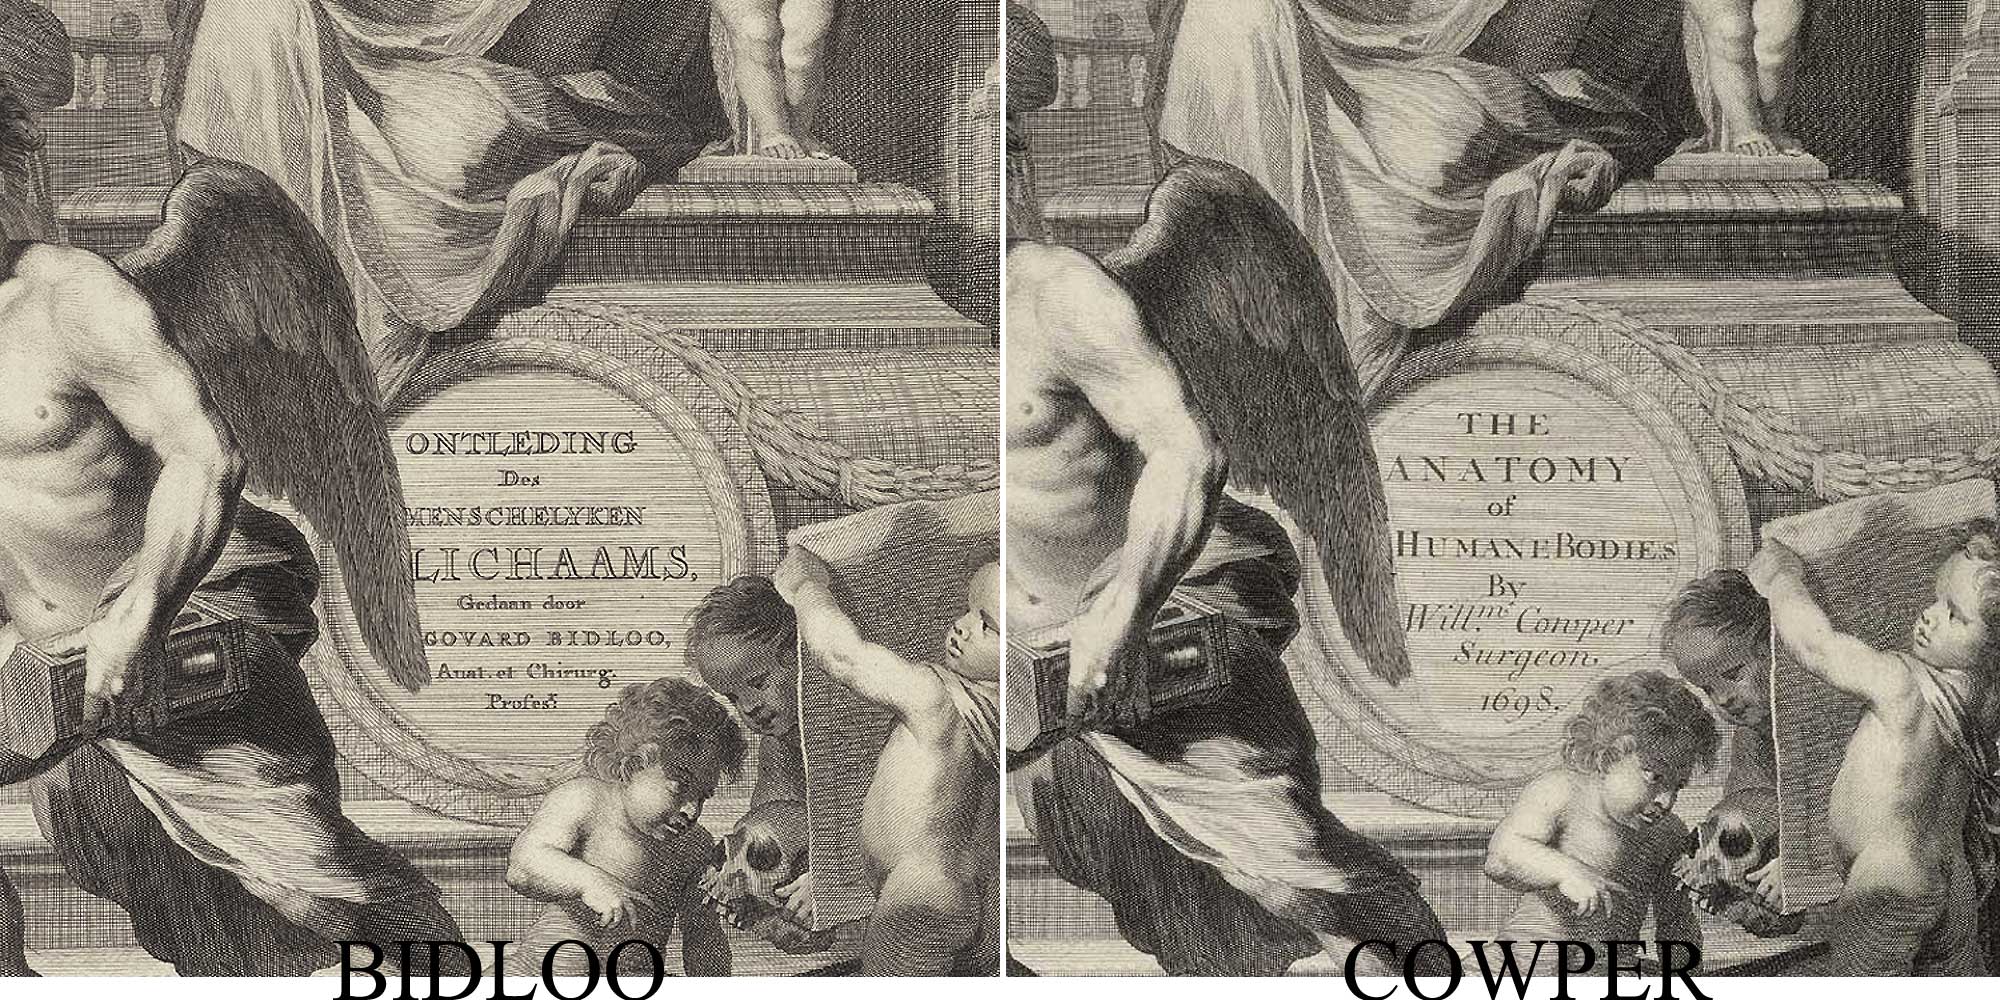 Details of engraved title pages of Govard Bidloo’s Ontleding Des Menschelyken Lichaams (Amsterdam, 1690) and William Cowper’s Anatomy of the Humane Bodies (Oxford, 1698), showing how Cowper altered the page to make it appear to be his own original work; the English and Dutch titles appear in the same round medallion amidst an allegorical scene with angels to the left and down below.